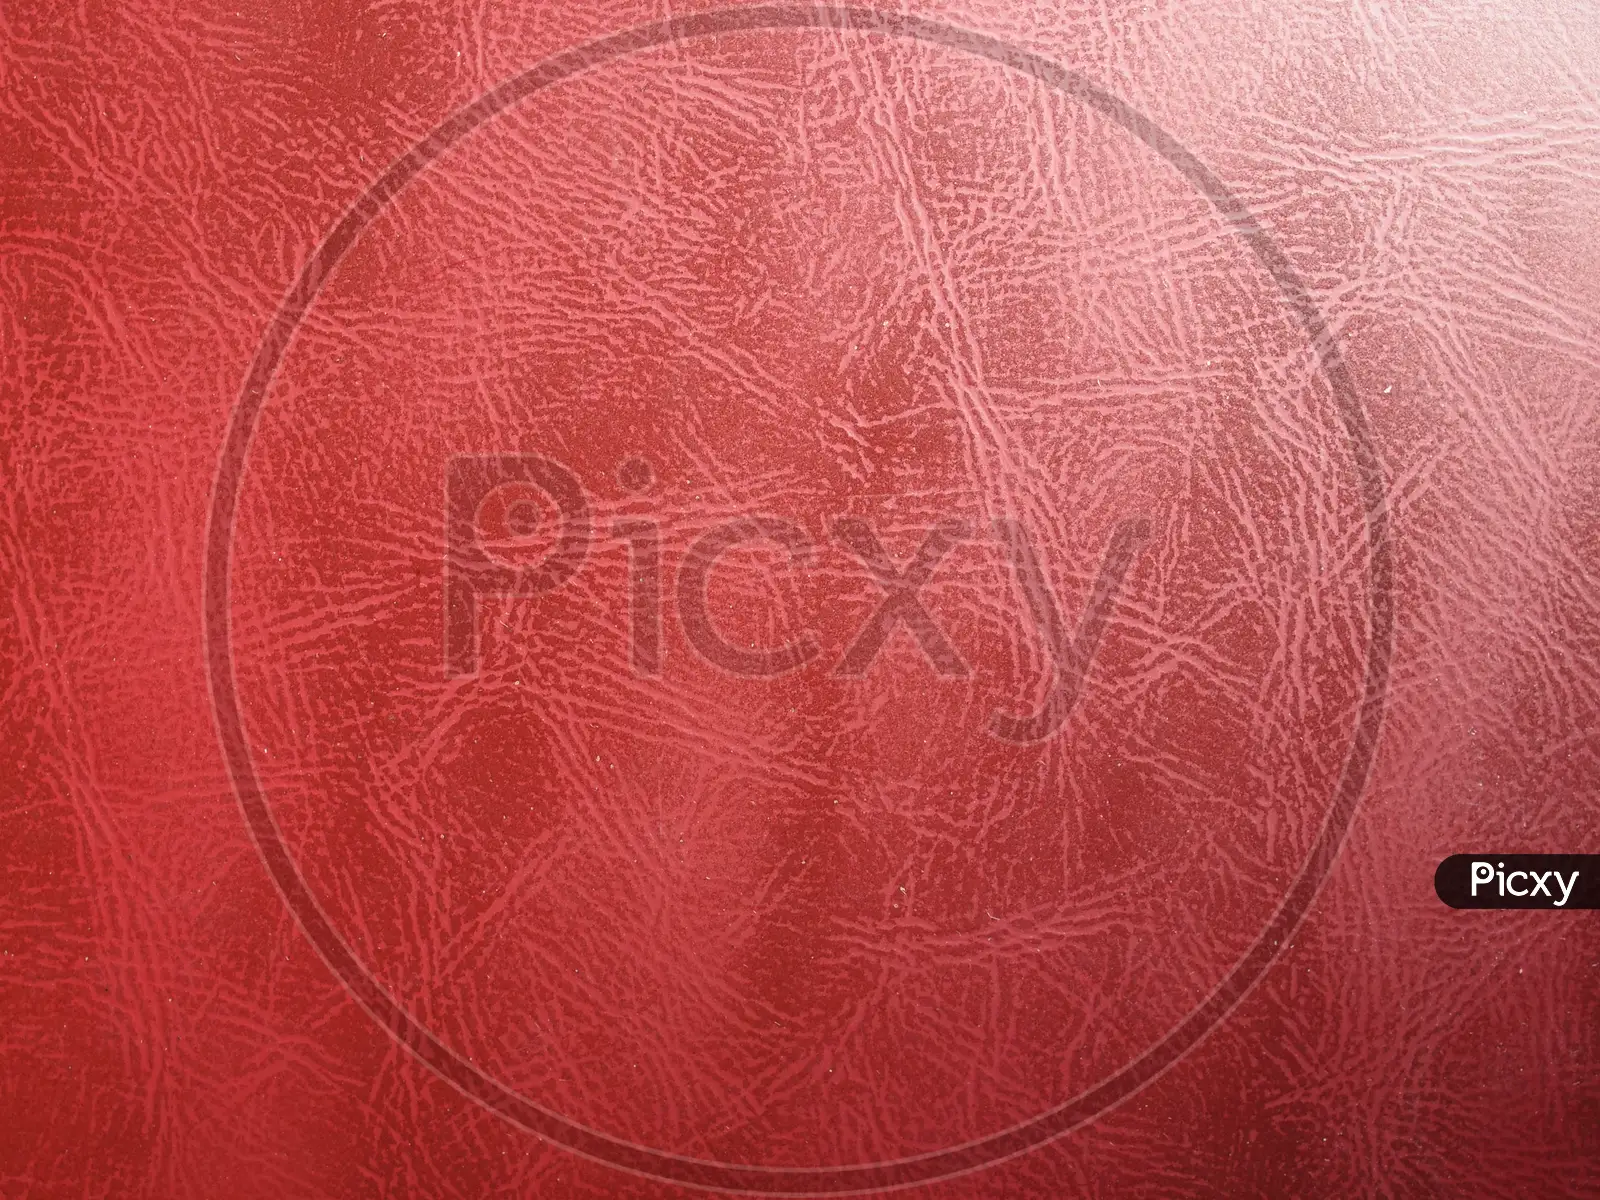 Image of Red Leatherette Faux Leather Texture Background-PJ918822-Picxy